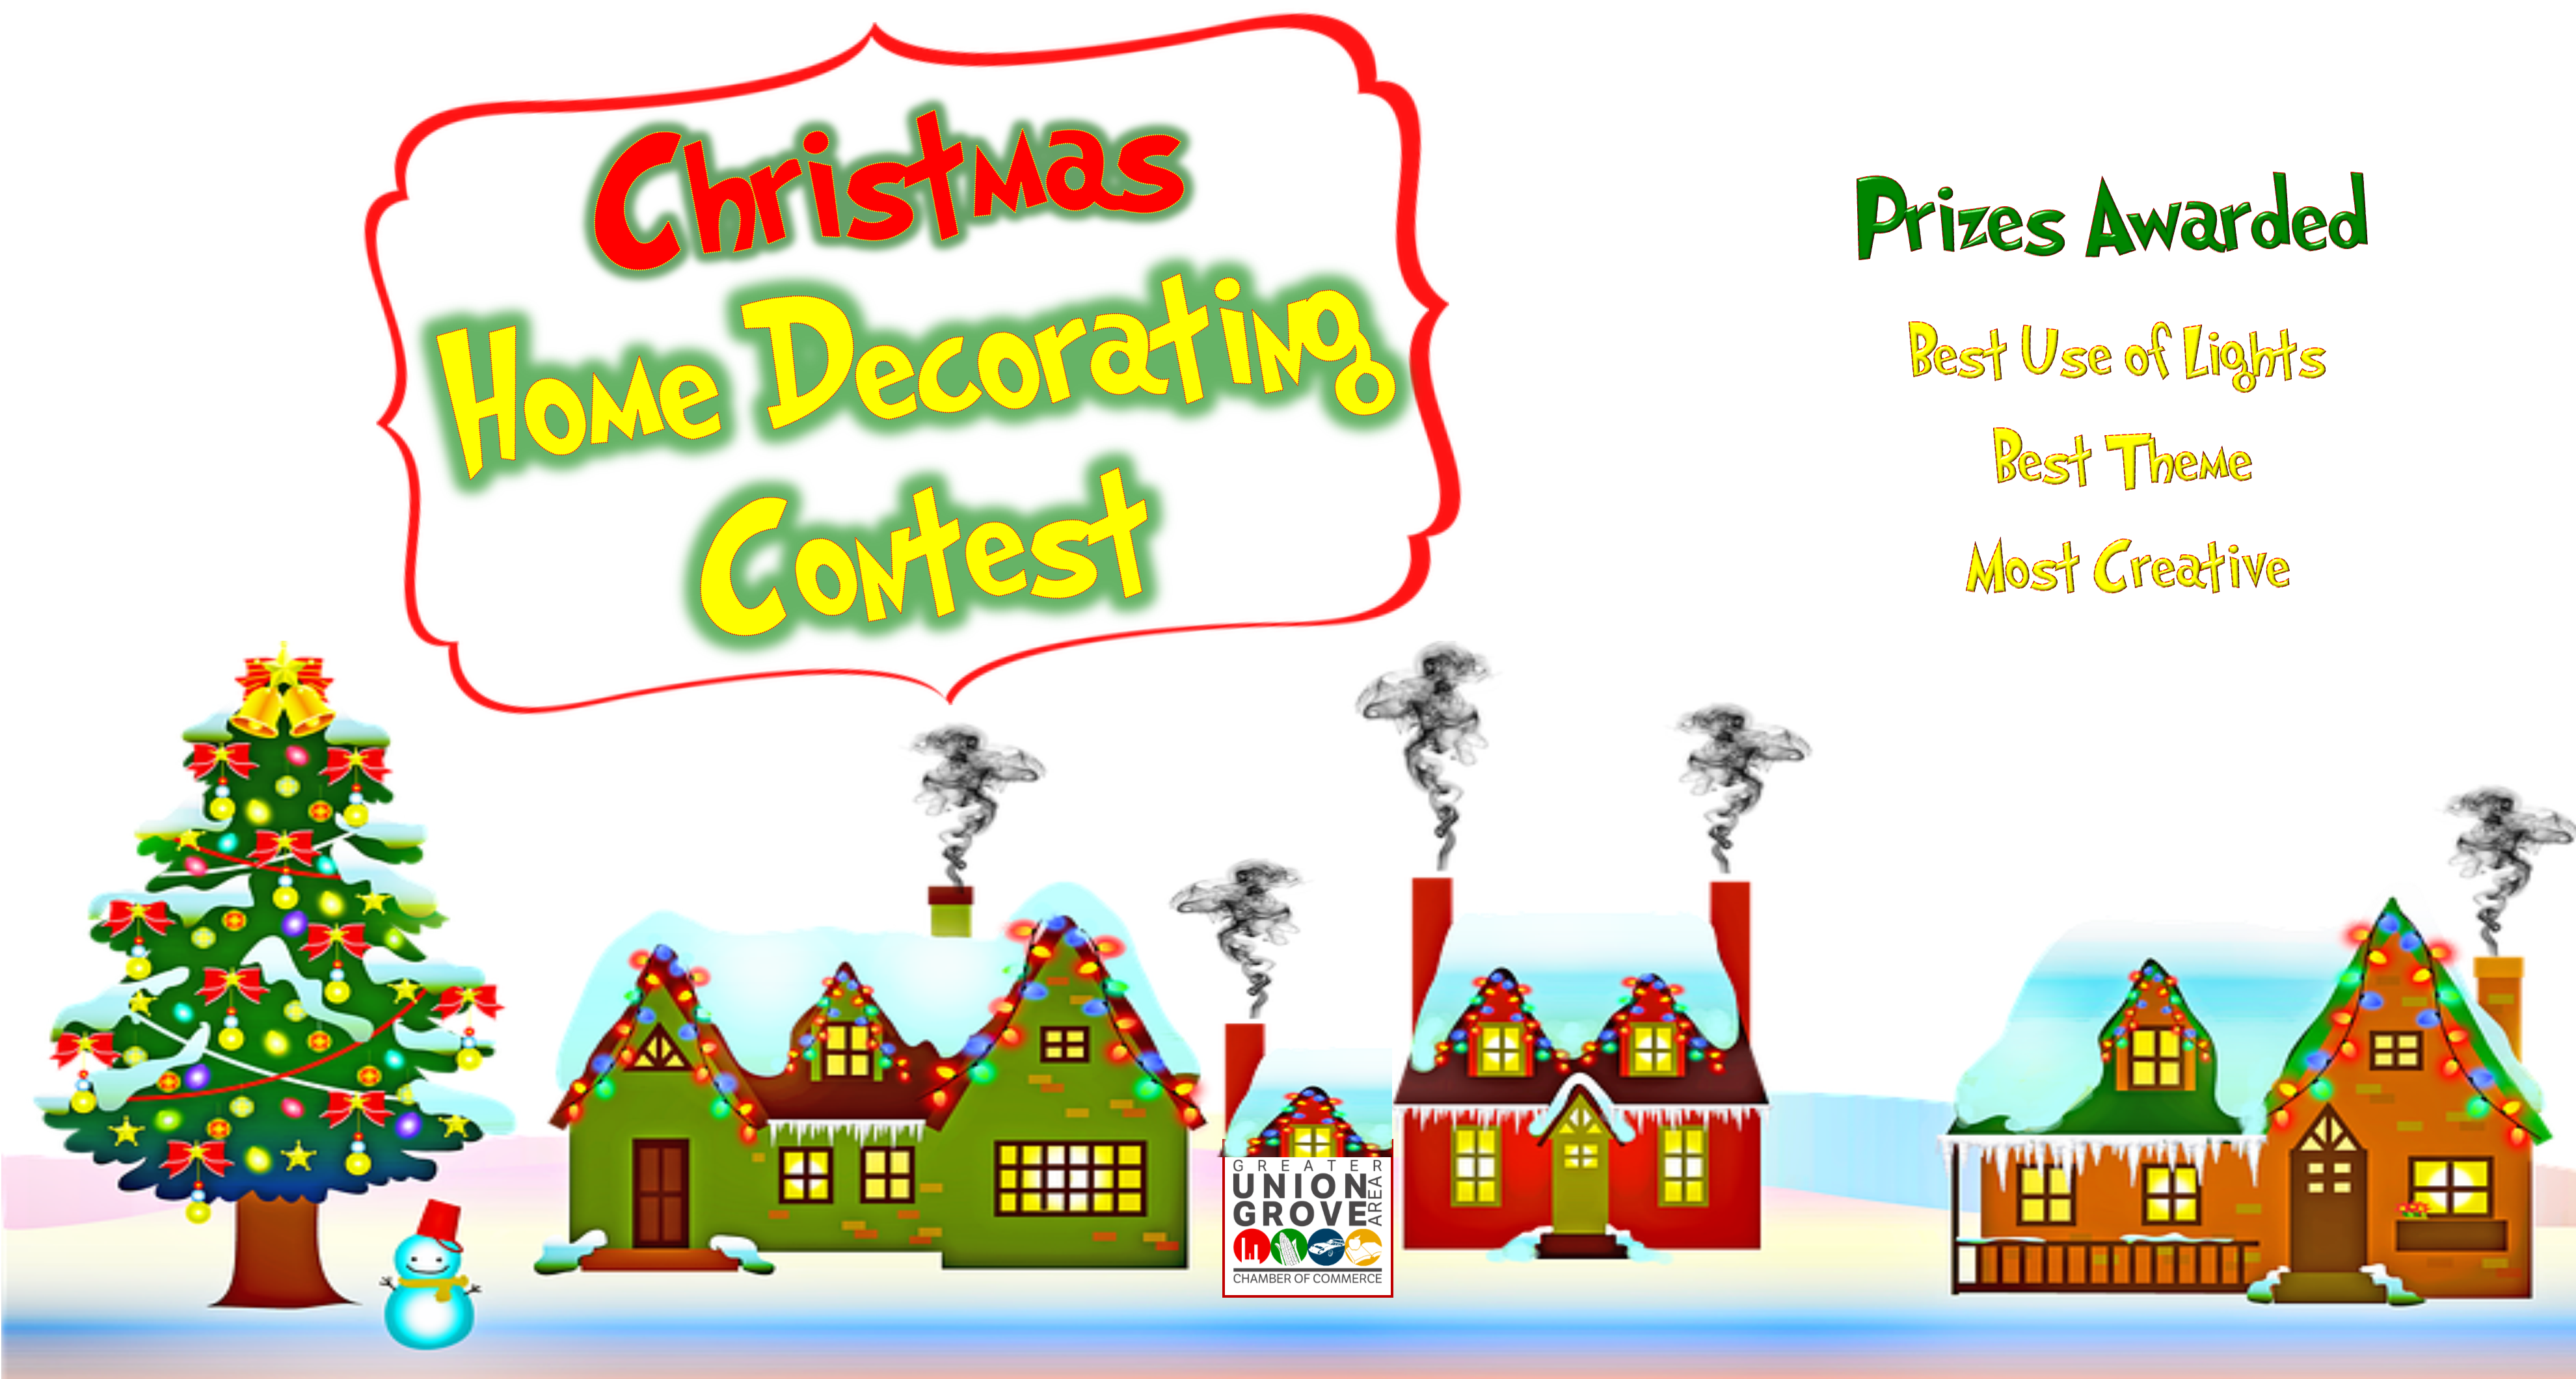 Home decorating contest - Village of Union Grove